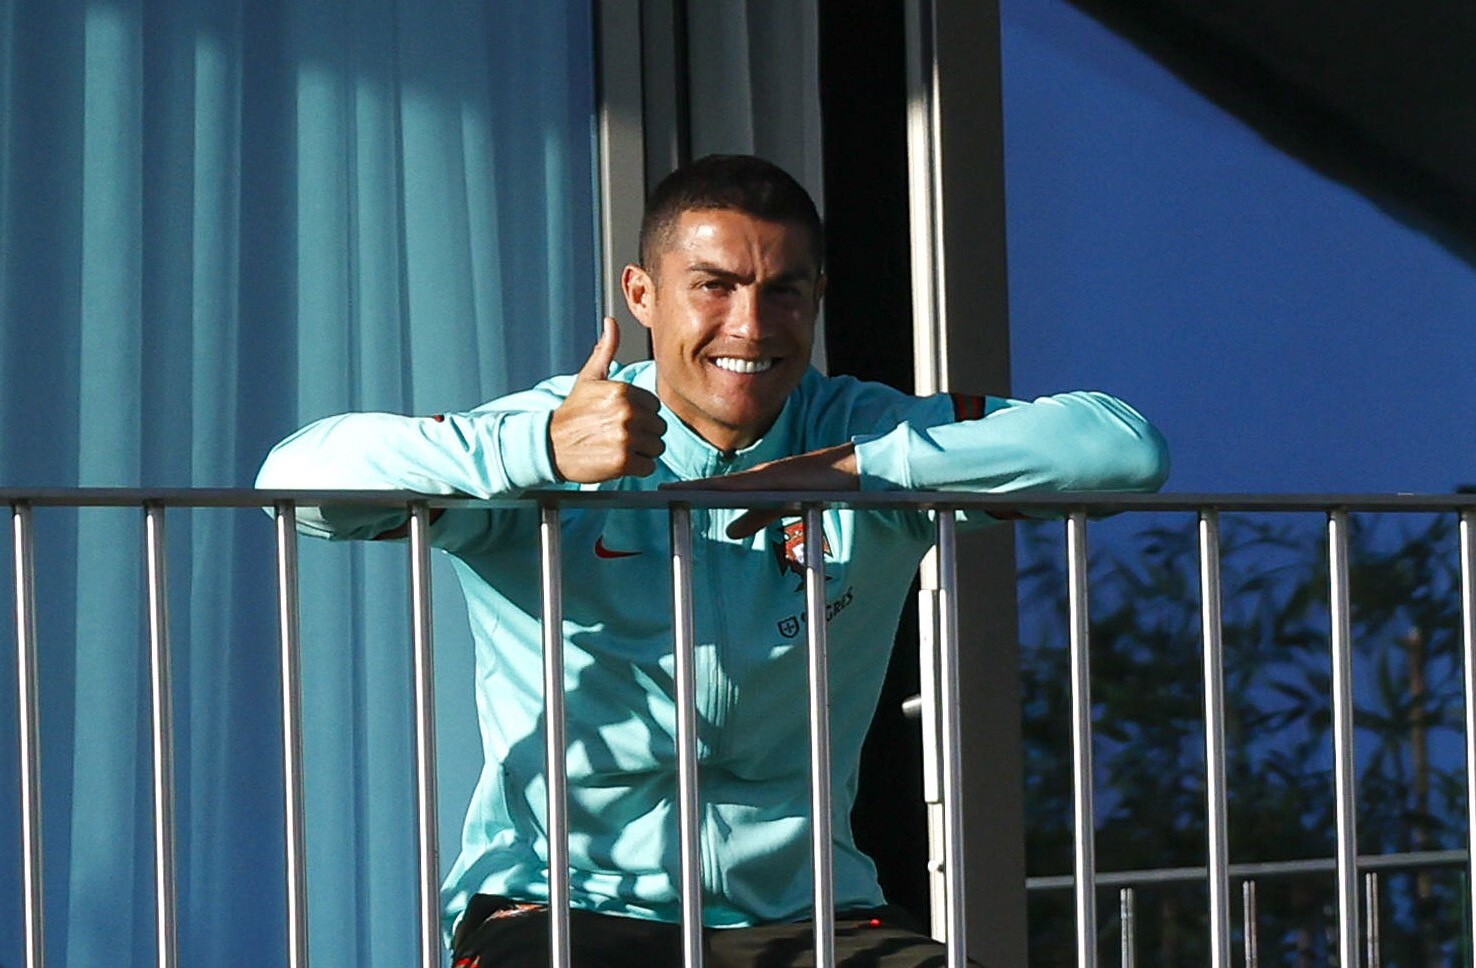 Cristiano Ronaldo gives the thumbs up while in isolation after testing positive for Covid-19. Photo: EPA